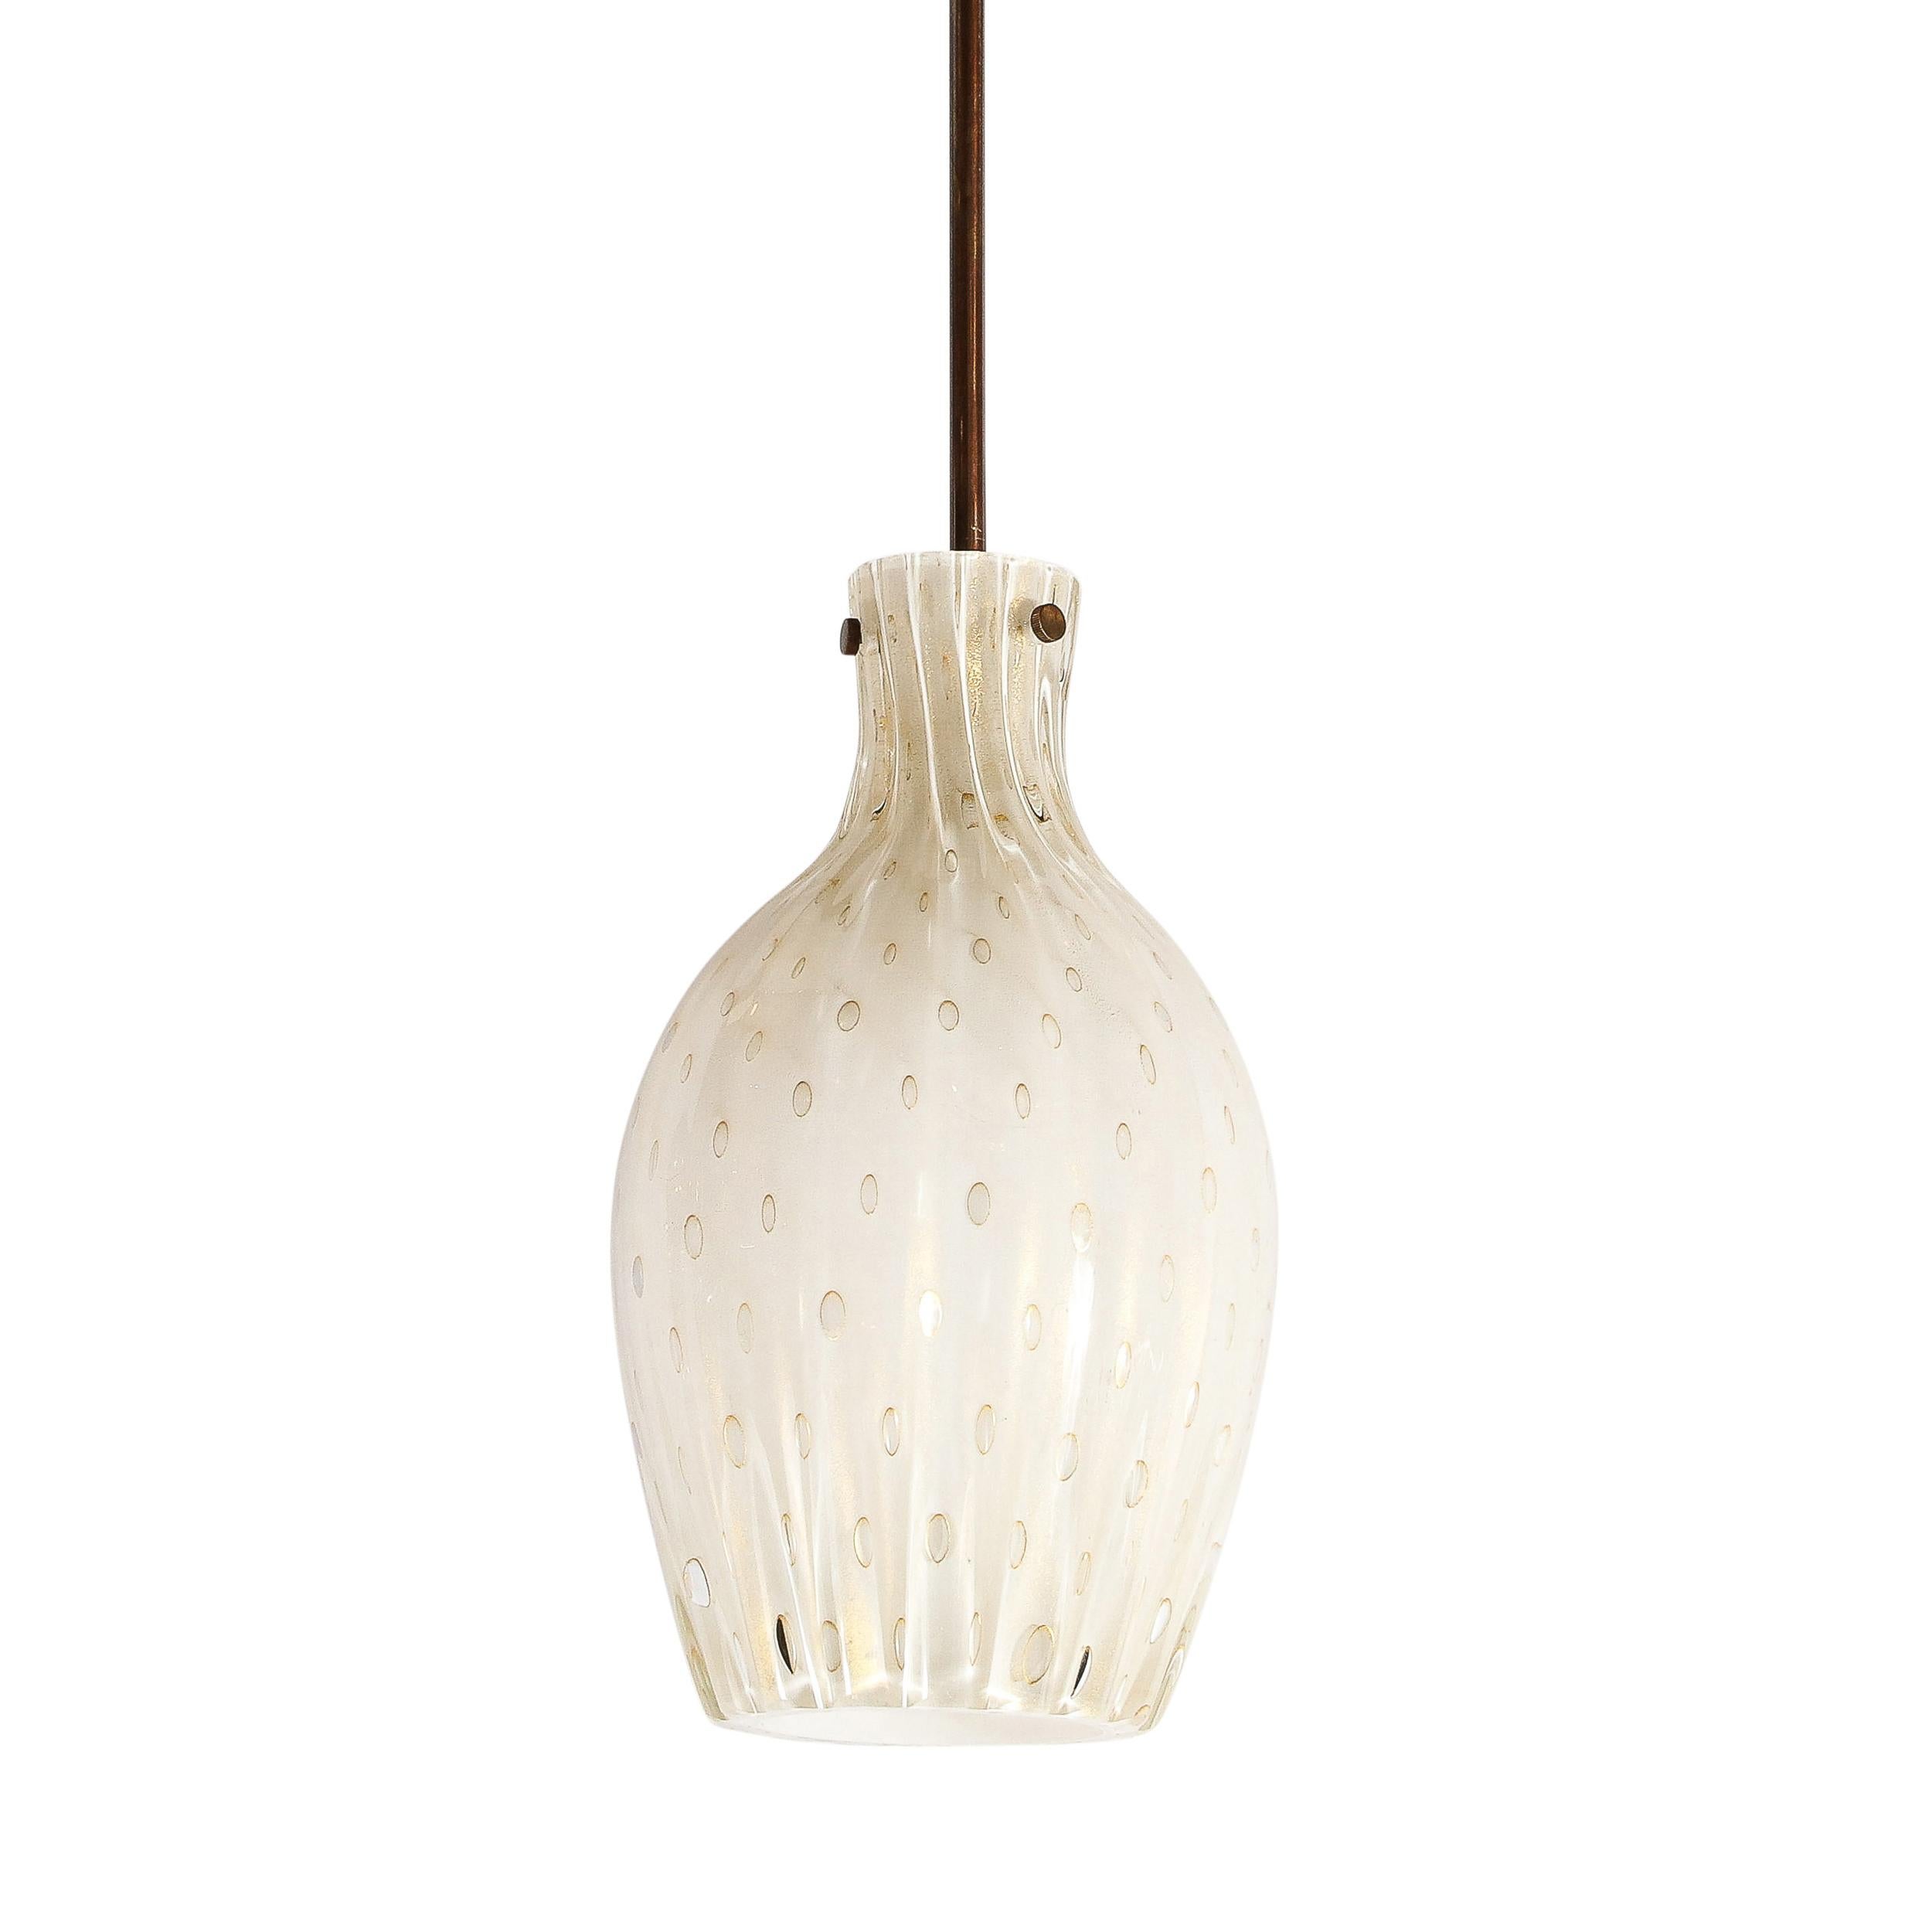 Italian Pair of Fluted Urn-Form Murano White Glass Pendants with Antiqued Brass Fittings